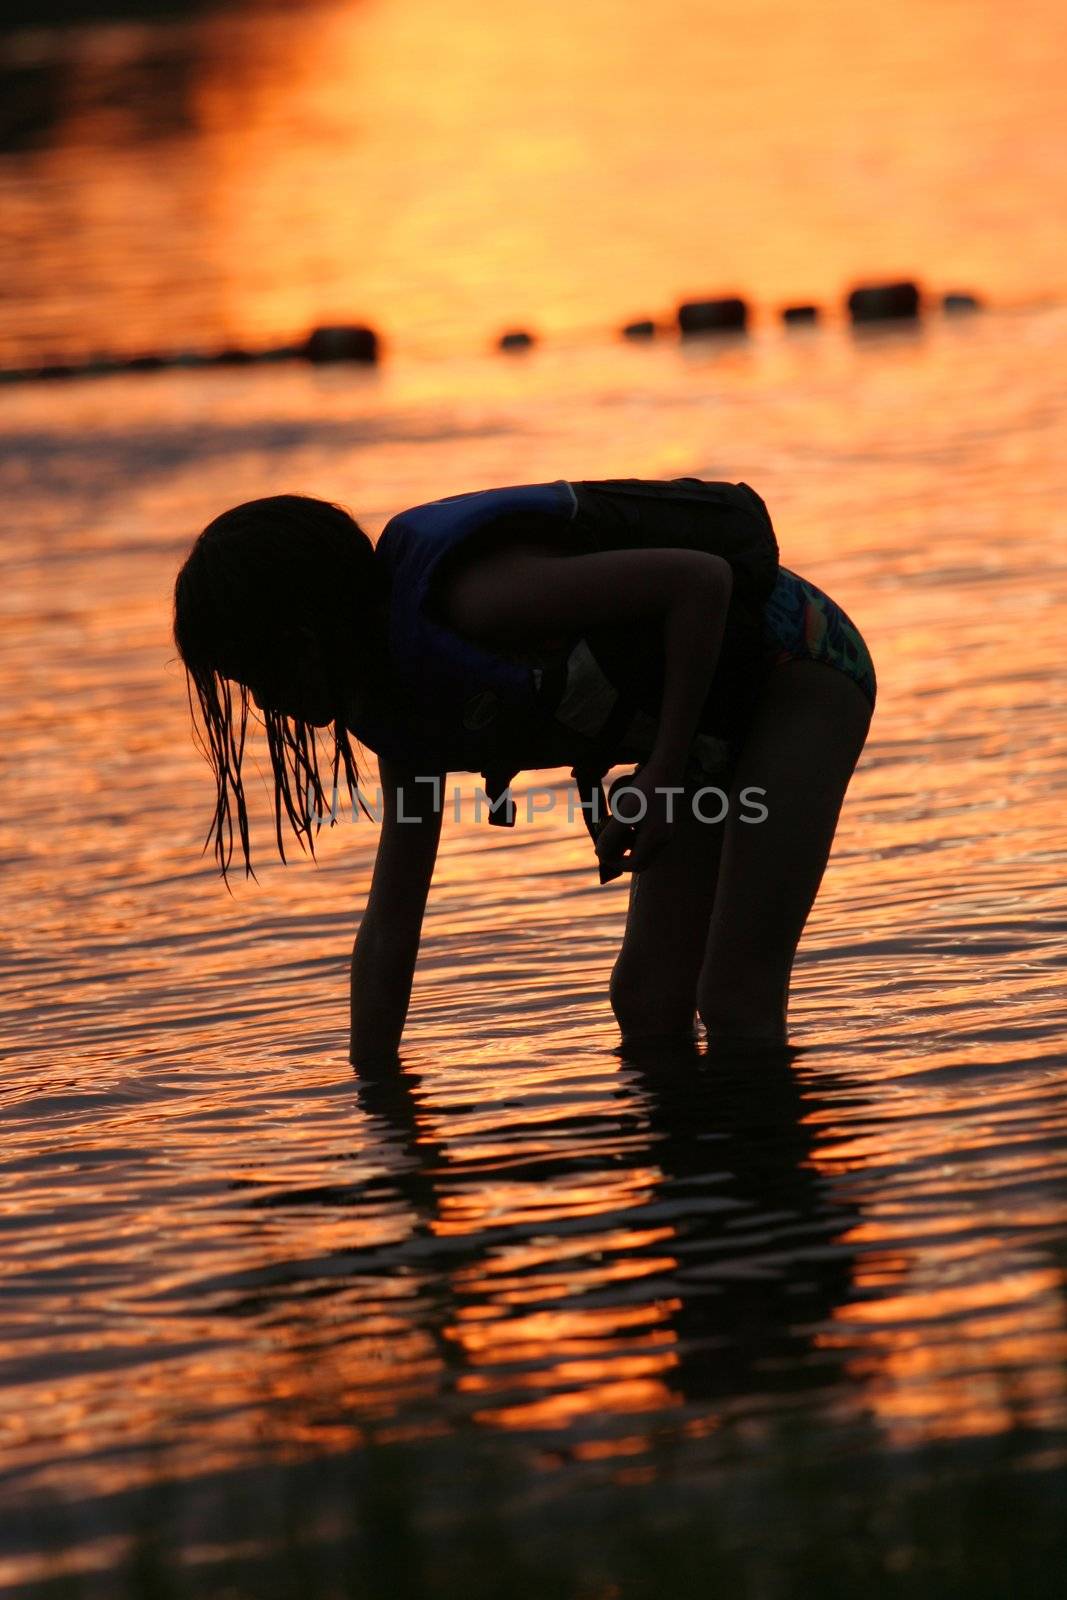 Little girl searching for shells at sunset